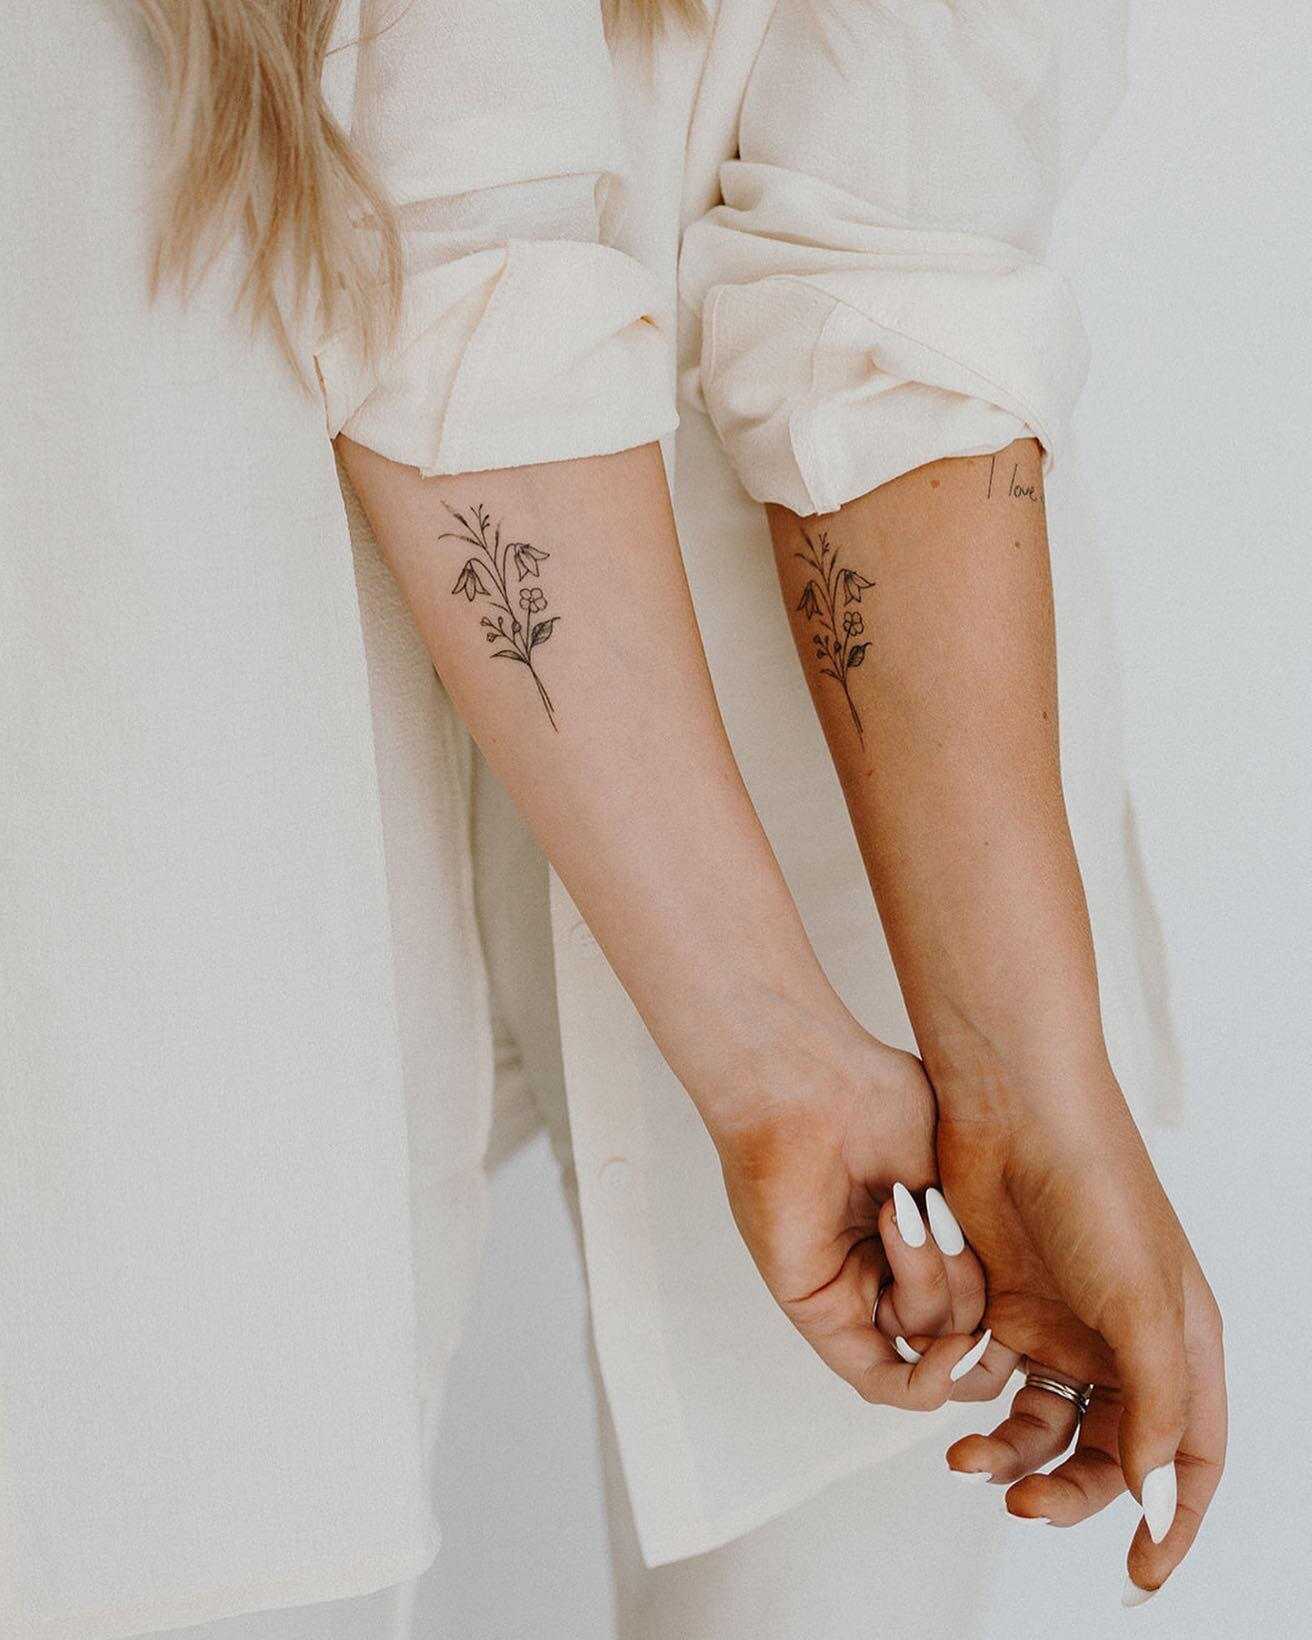 I mean, it was only fitting to get &ldquo;twin&rdquo; tattoos.
And when we found there was a &ldquo;twin&rdquo; flower that originated in Ontario it was even more fitting. 

#wombmates